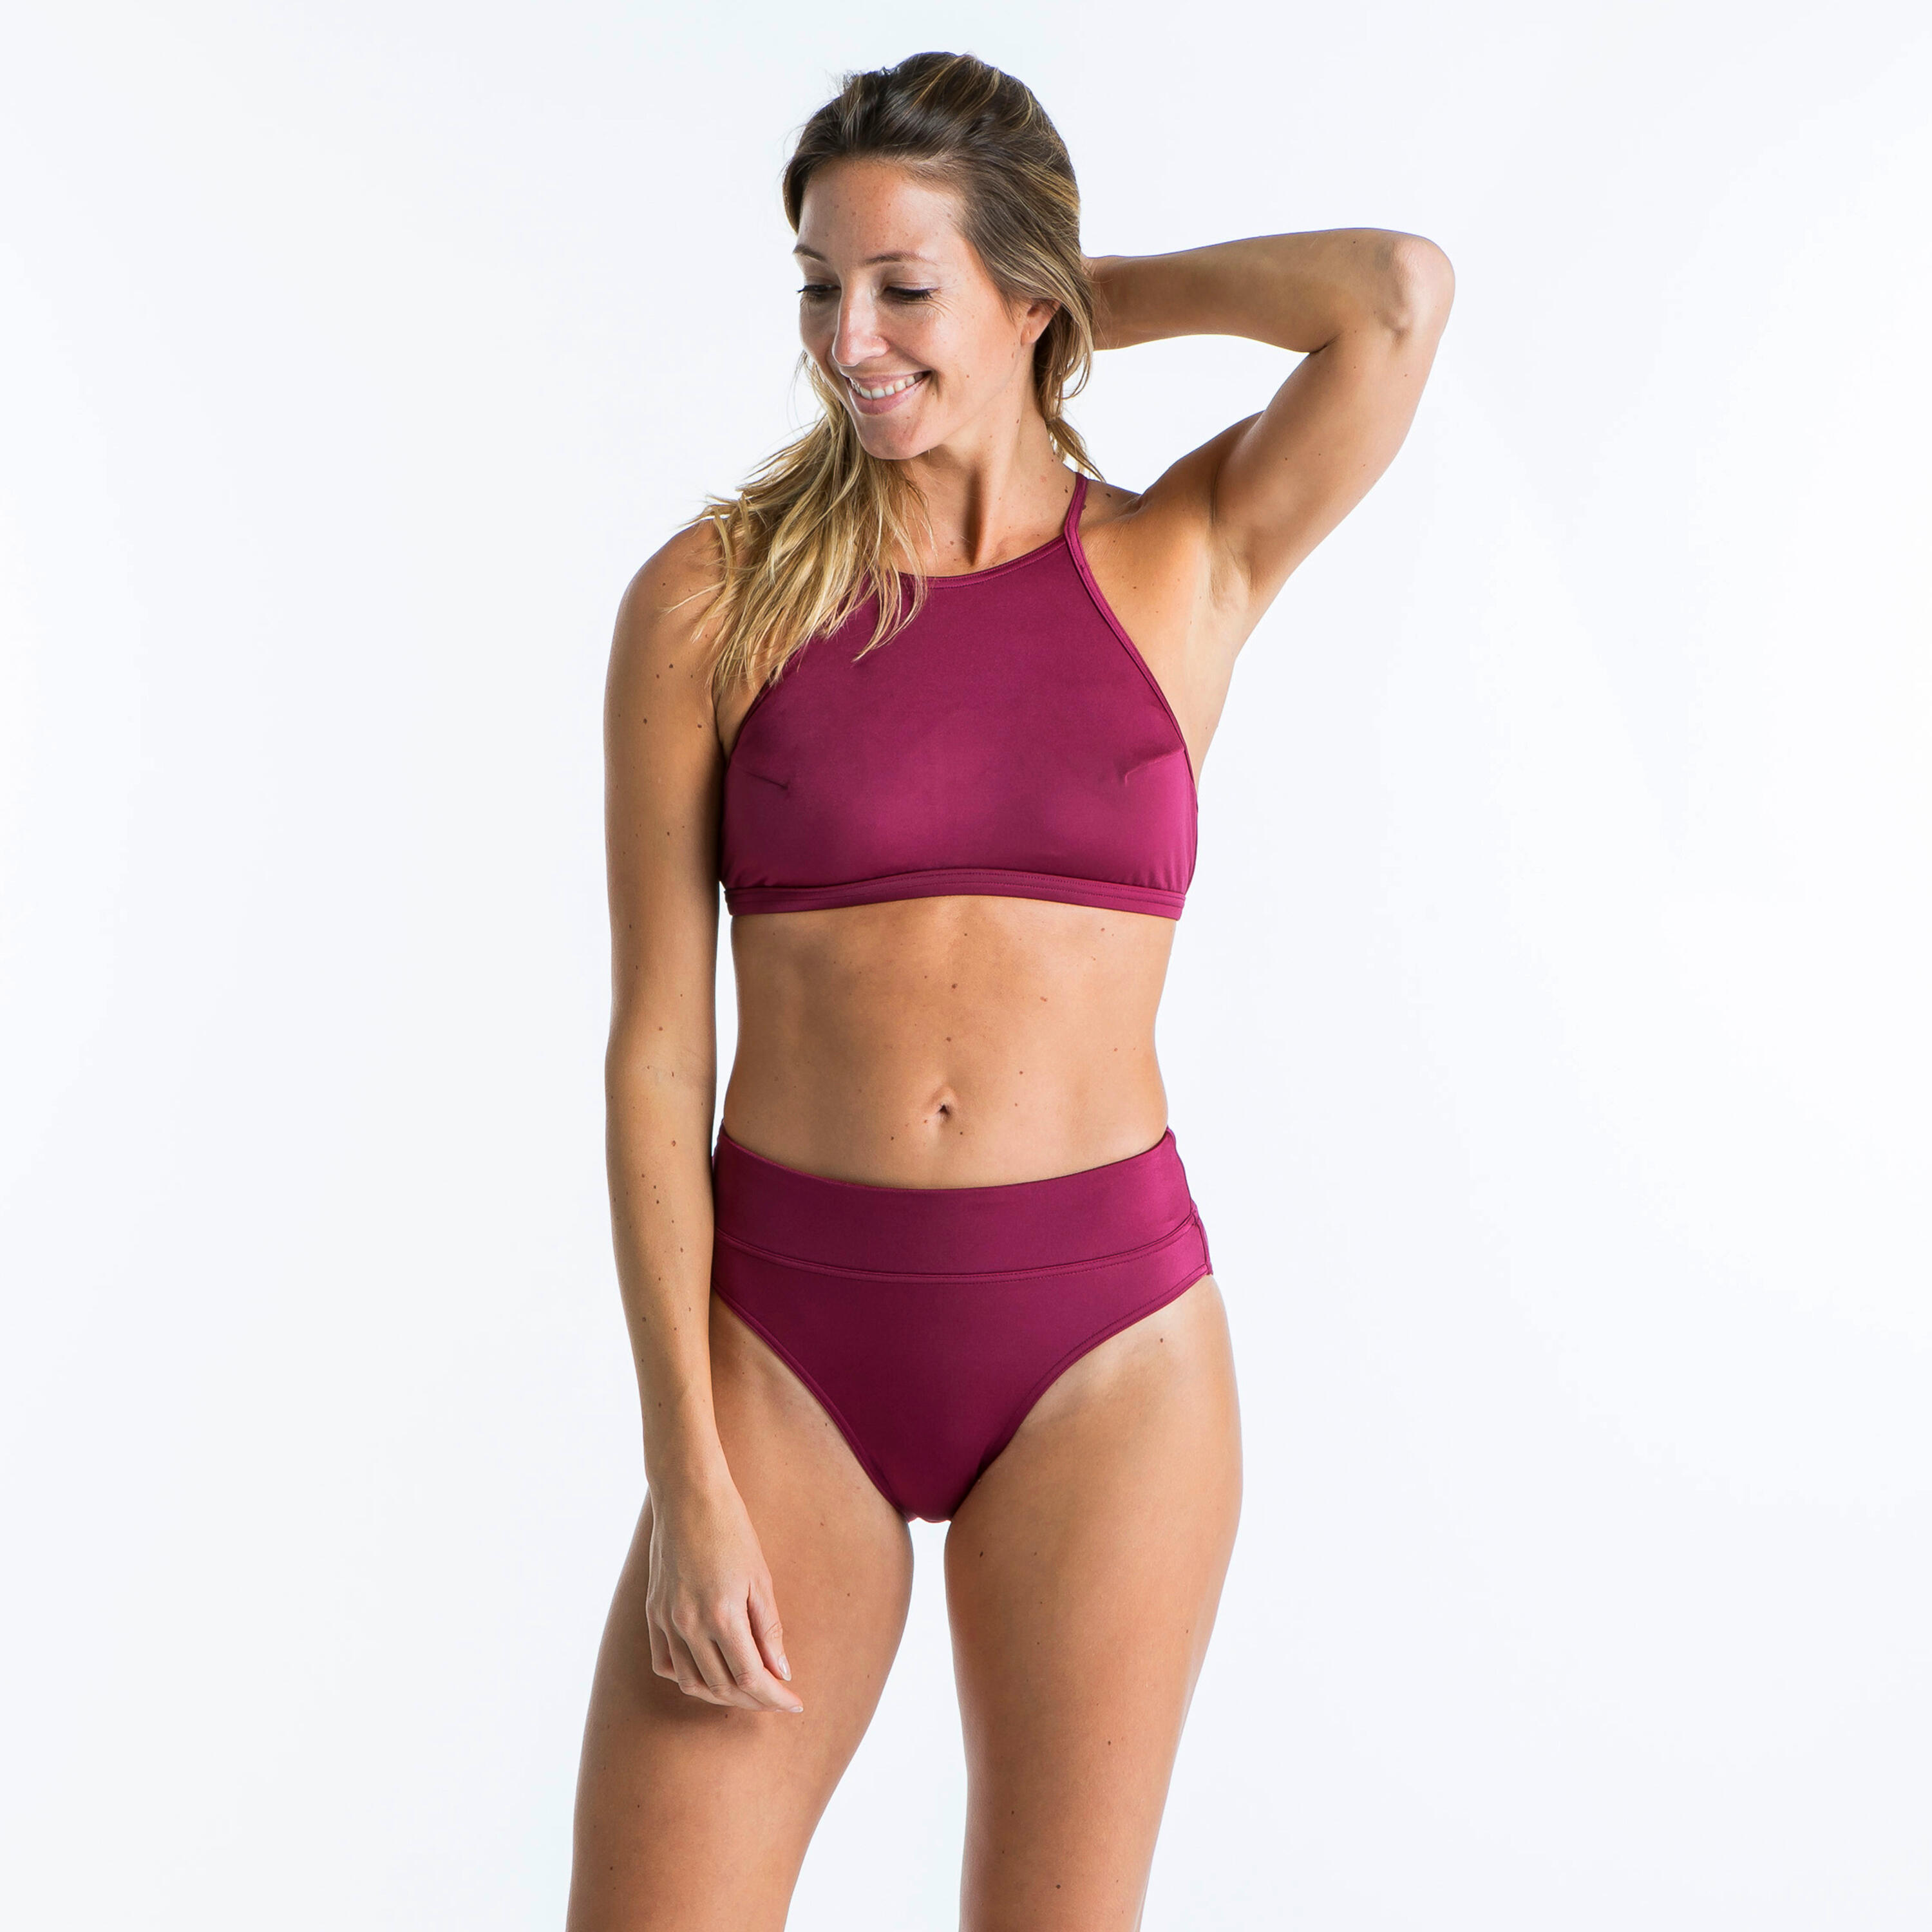 Women's Surfing Swimsuit Crop Top with Open Back ANDREA - BURGUNDY RED 2/10